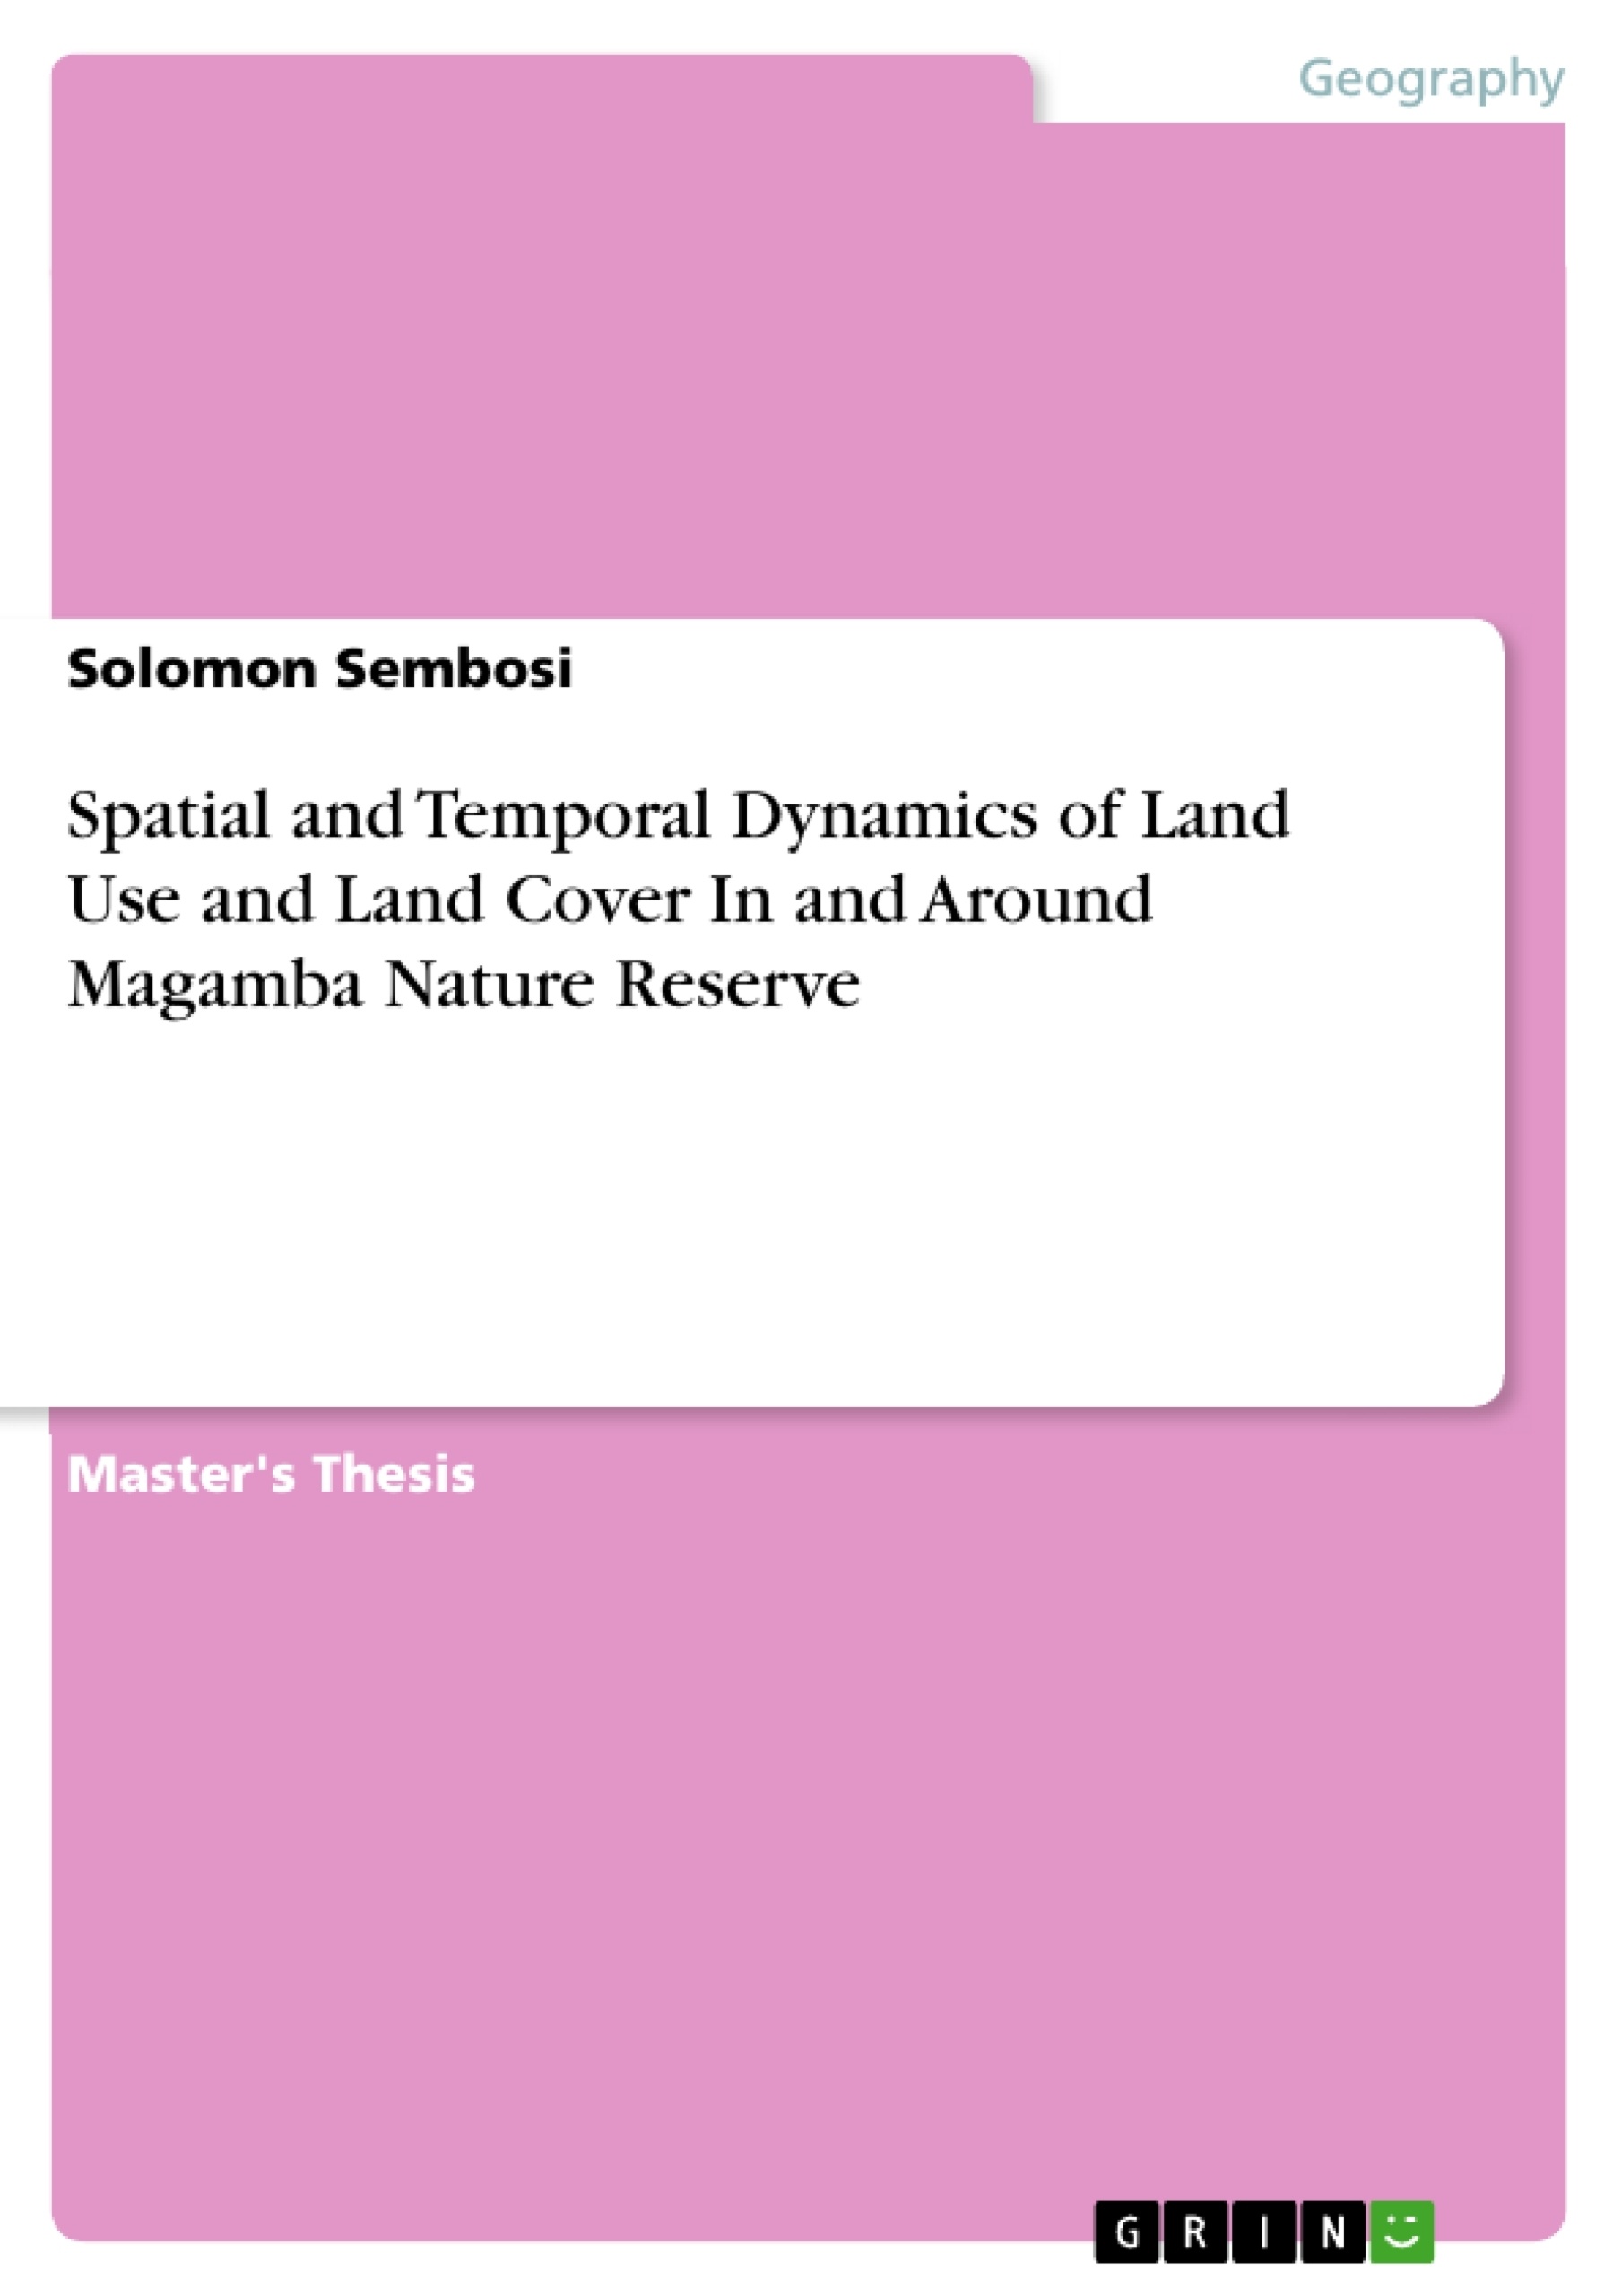 Titre: Spatial and Temporal Dynamics of Land Use and Land Cover In and Around Magamba Nature Reserve